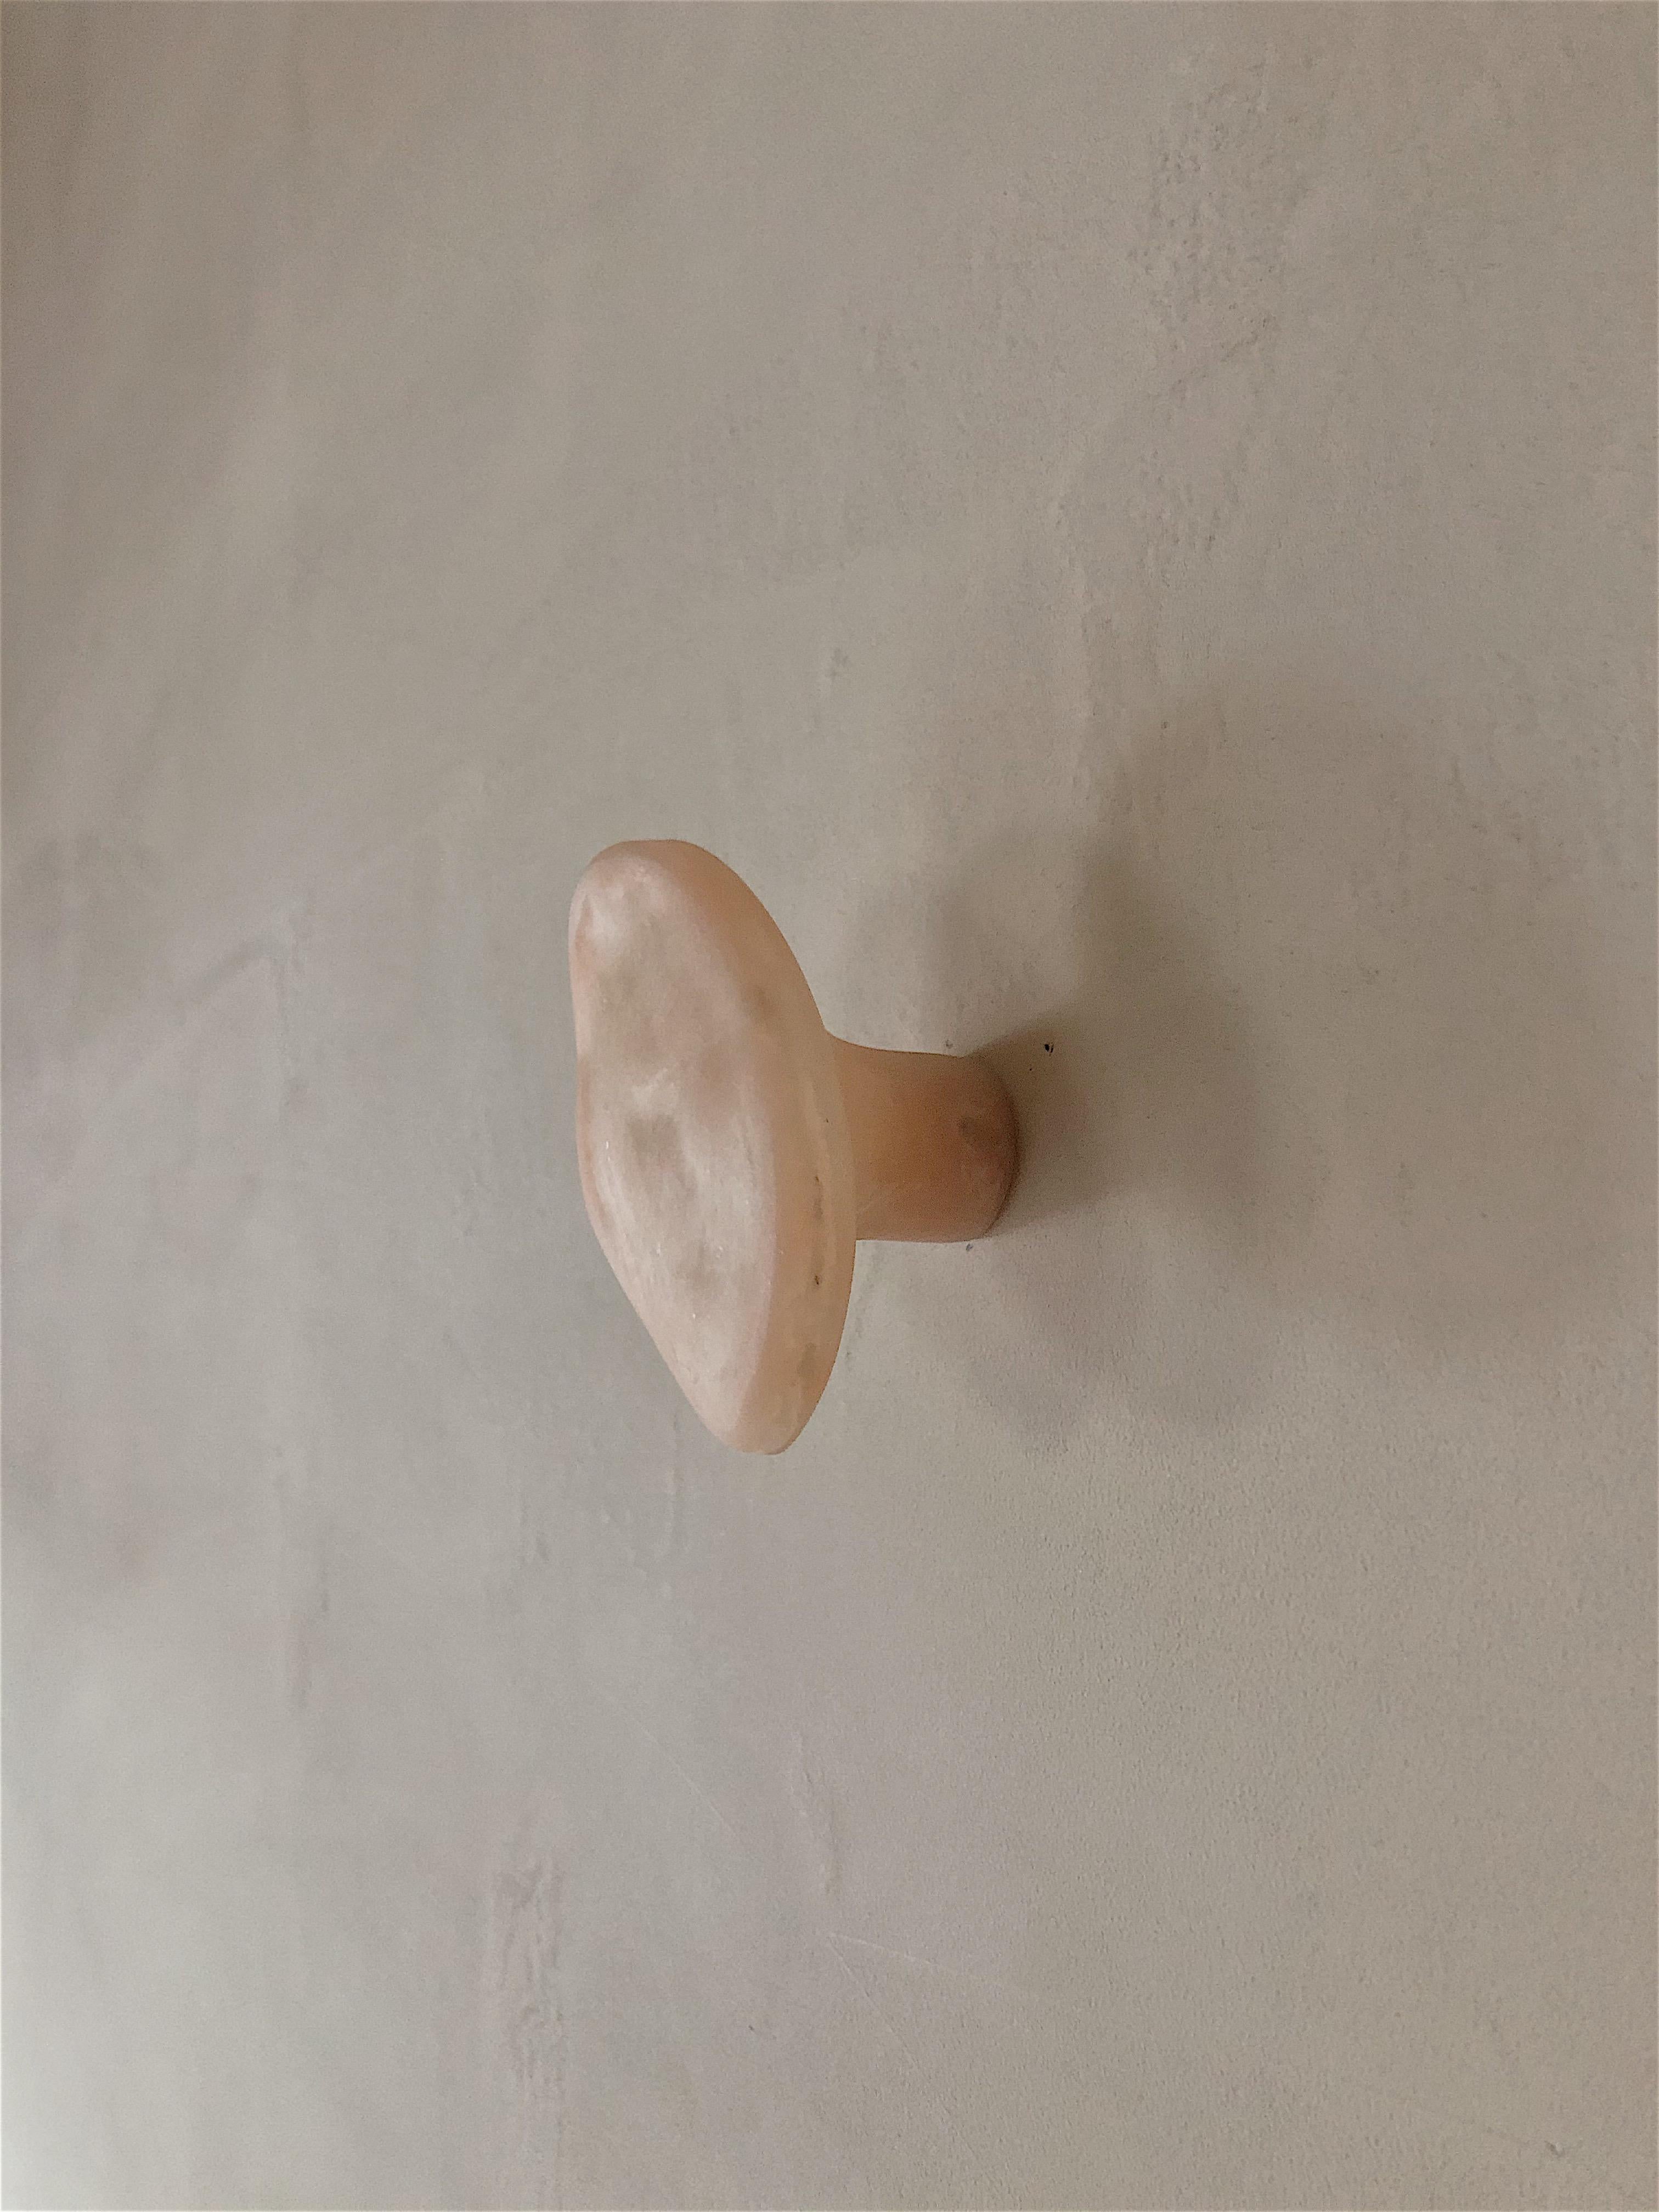 Rose cobble hook by kar
Dimensions: W 6 x D 5.5 x H 1 cm
Materials: FRP
Other colours available.

Like a jade in the rough, it could be use as a hook or door handle, the hook with irregular lines brings fun to a monotonous line-straight door.
 
Kar,